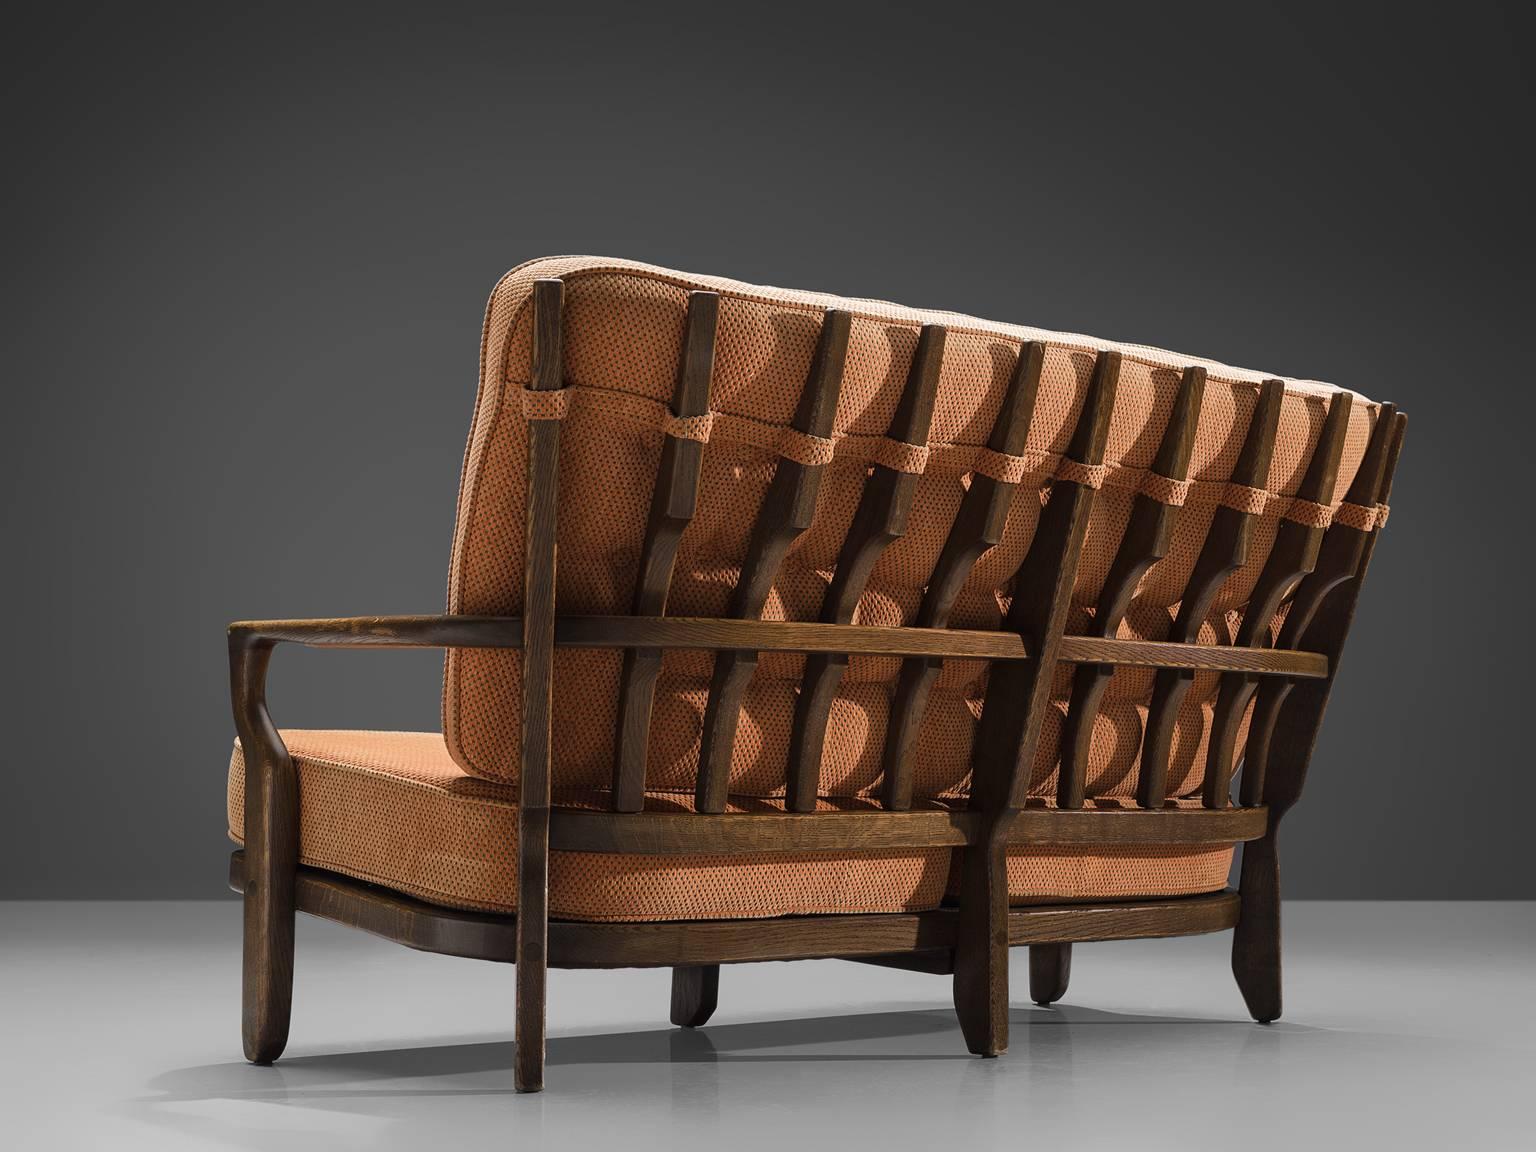 Guillerme and Chambron, peech, pink fabric, oak, France, 1950s

This sculptural carved oak settee is designed by Guillerme and Chambron. The design duo is known for their sculptural, crafted solid oak furniture. This comfortable sofa has an